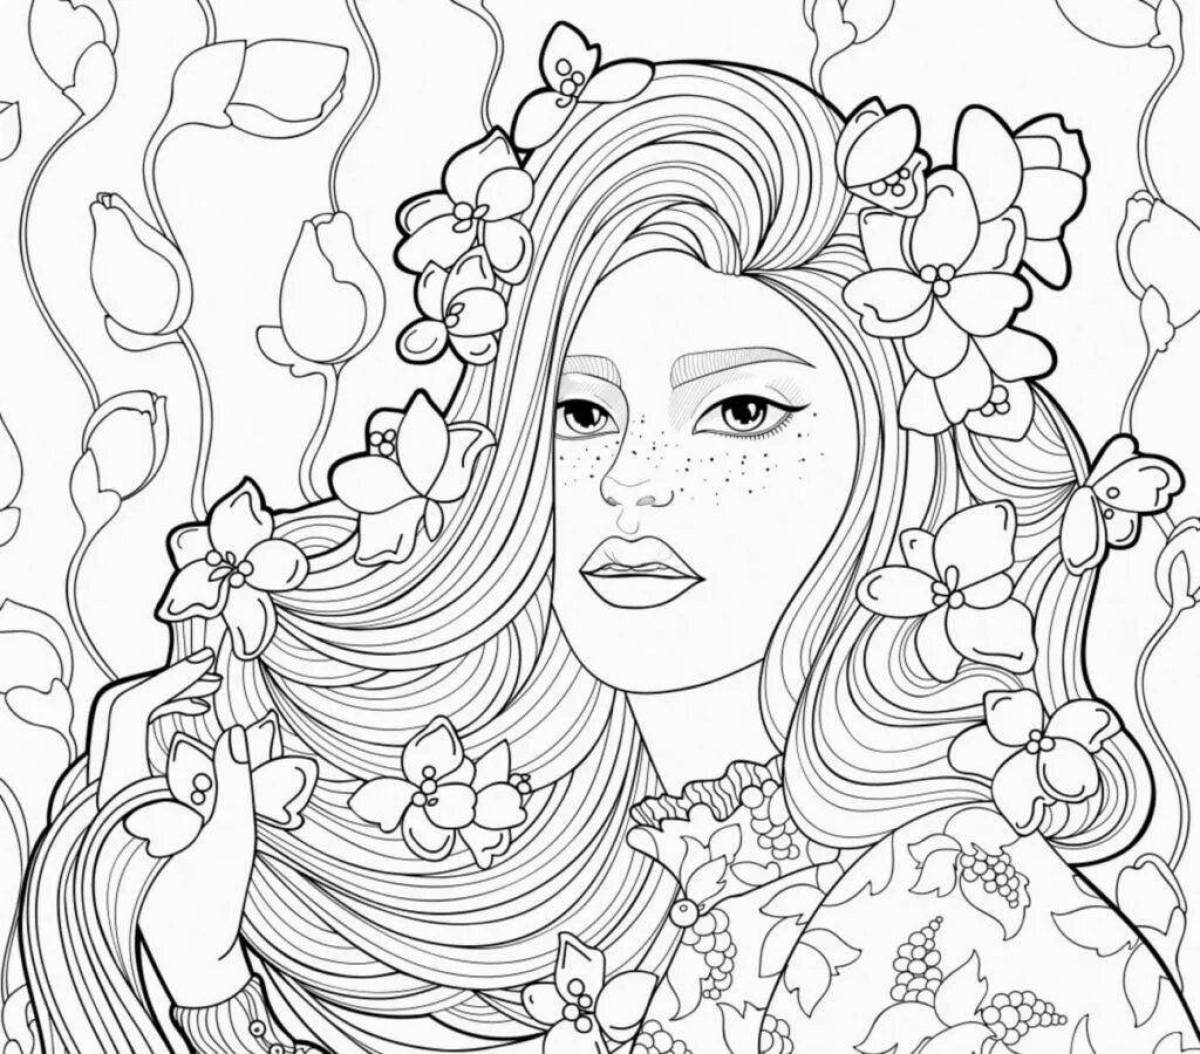 A wonderful coloring book for girls 16-17 years old